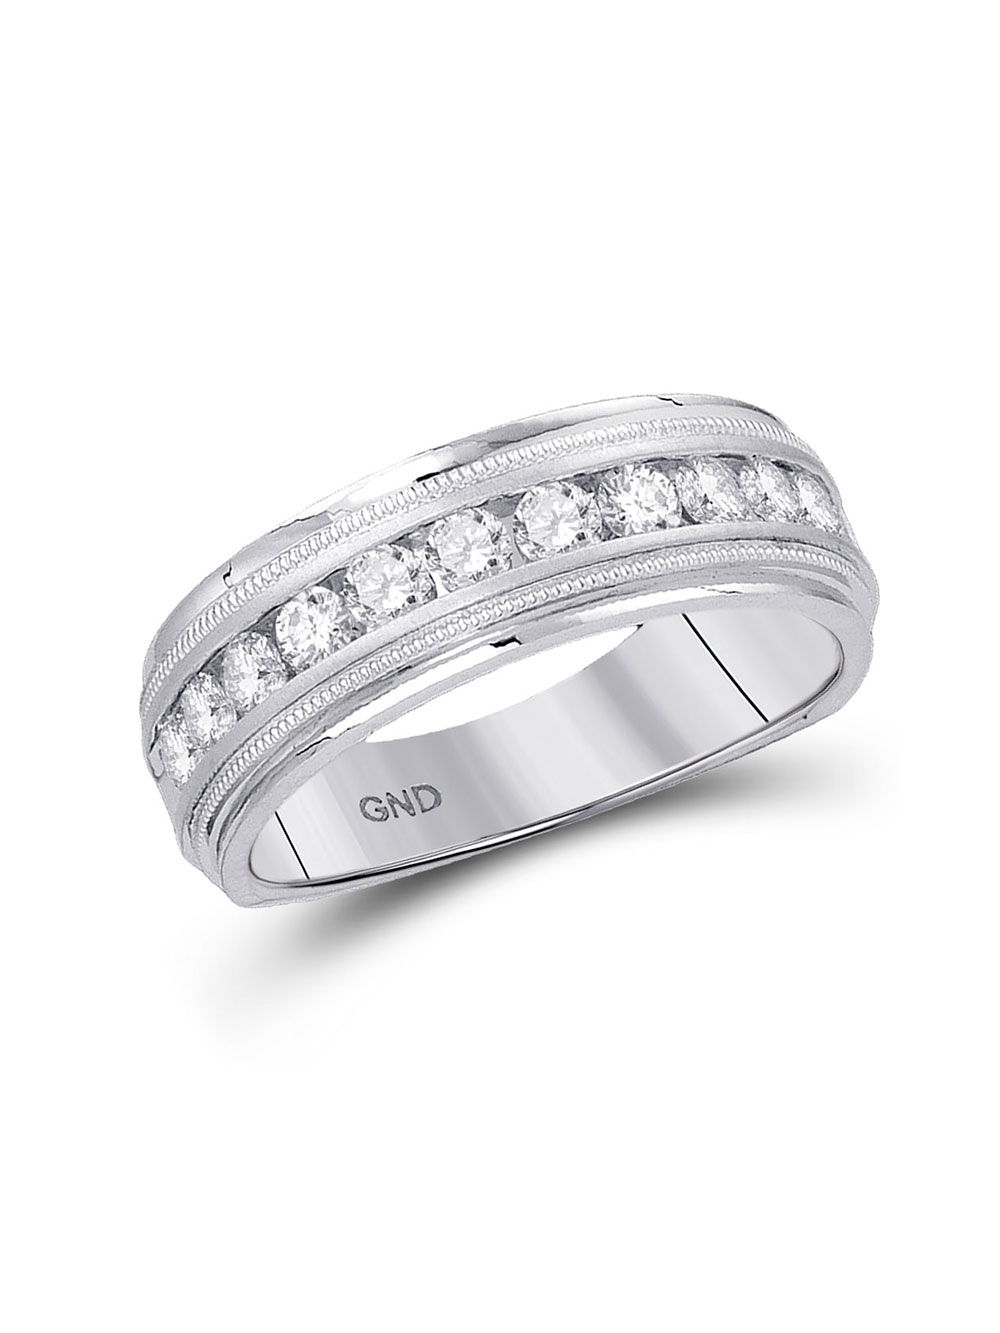 Jewels By Lux 10kt White Gold Mens Round Diamond Wedding Band Ring 1/4 -  koztet.oops.jp